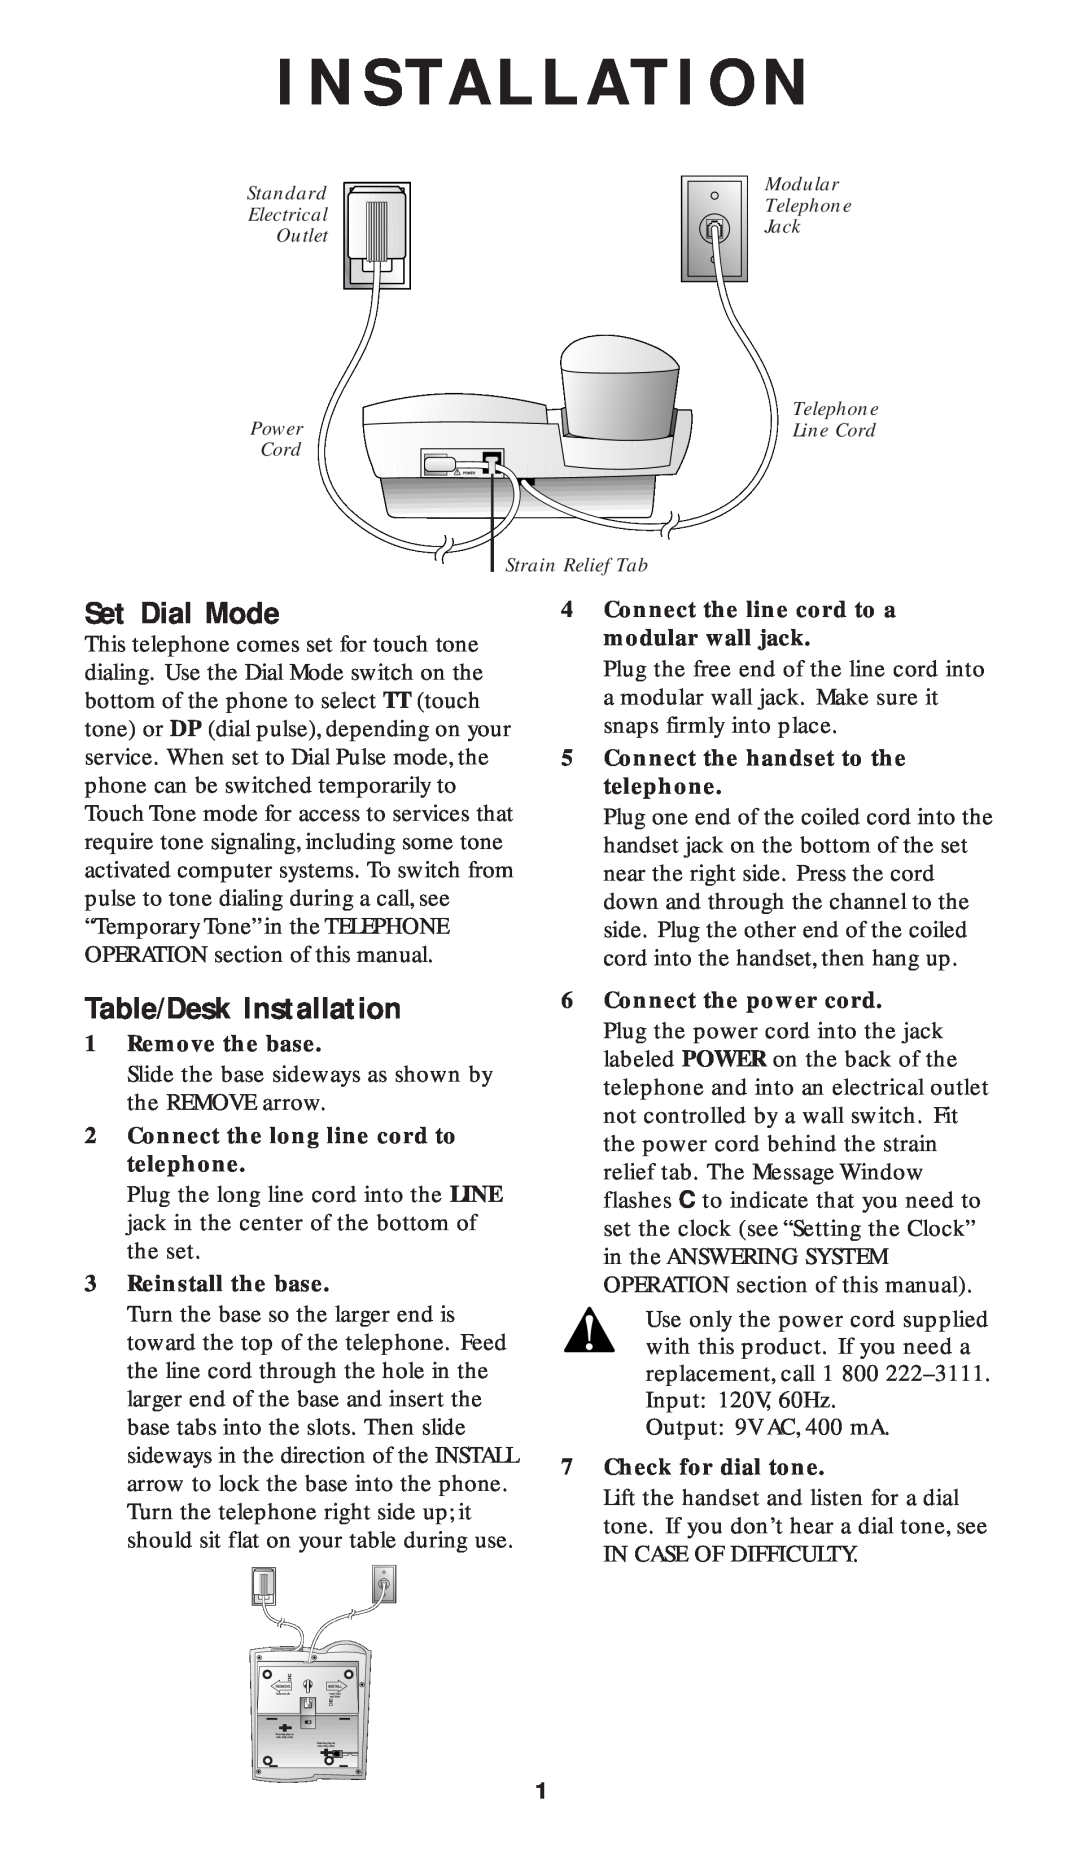 AT&T 1817 user manual I N S Ta L L At I O N, Set Dial Mode, Table/Desk Installation, Remove the base, Reinstall the base 